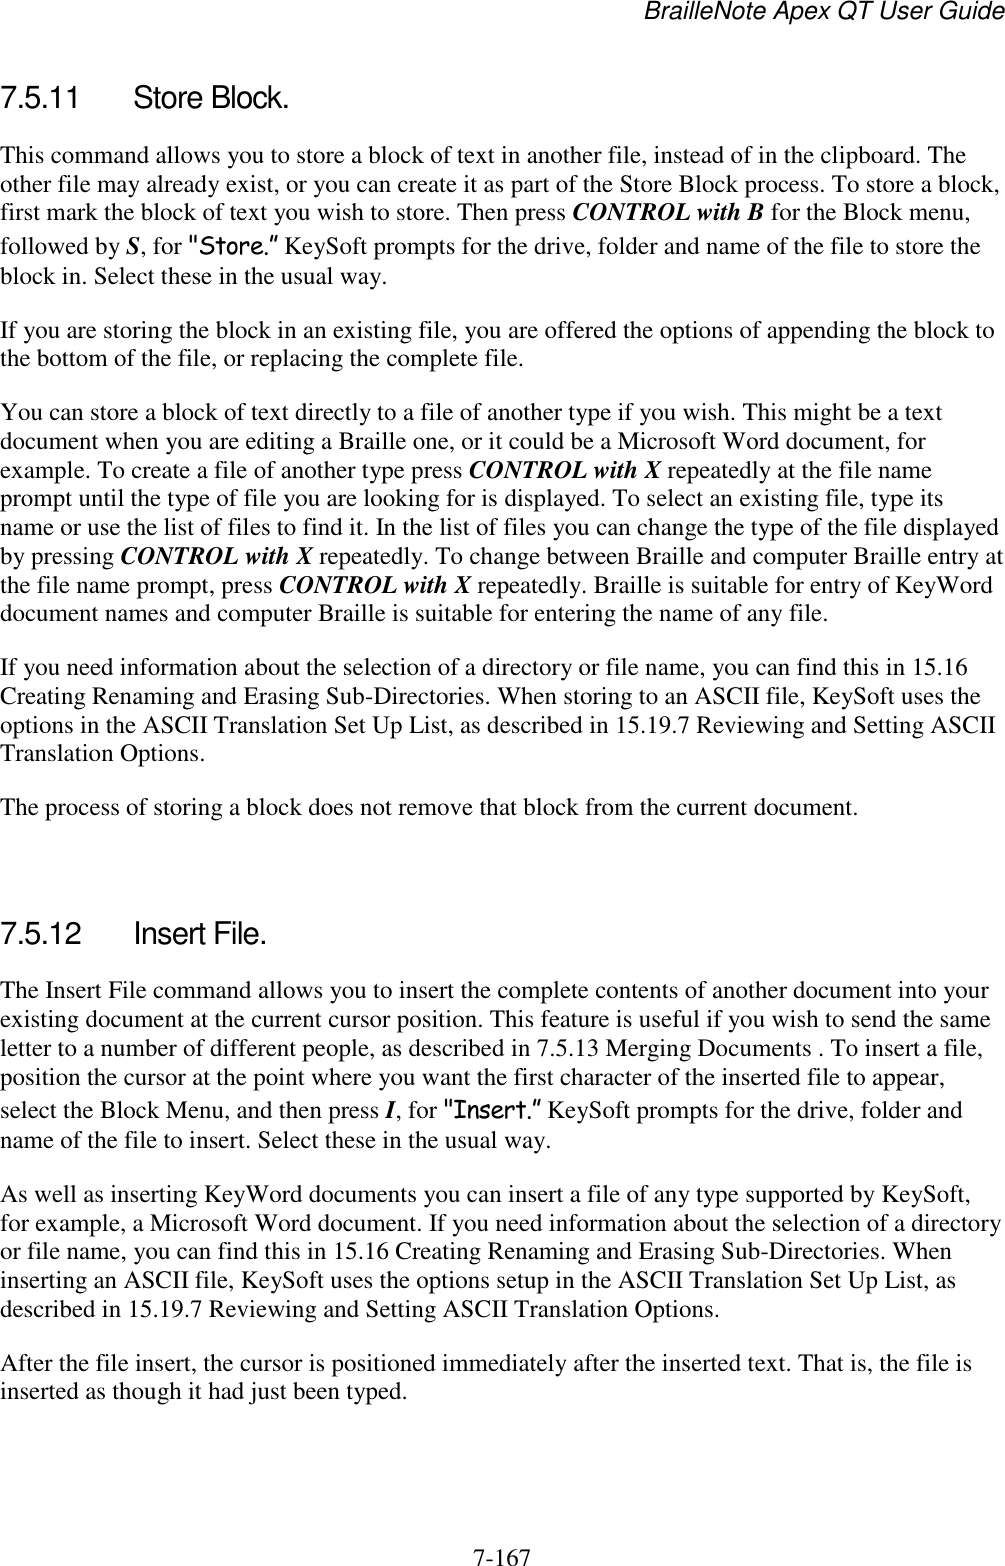 BrailleNote Apex QT User Guide  7-167   7.5.11  Store Block. This command allows you to store a block of text in another file, instead of in the clipboard. The other file may already exist, or you can create it as part of the Store Block process. To store a block, first mark the block of text you wish to store. Then press CONTROL with B for the Block menu, followed by S, for &quot;Store.” KeySoft prompts for the drive, folder and name of the file to store the block in. Select these in the usual way. If you are storing the block in an existing file, you are offered the options of appending the block to the bottom of the file, or replacing the complete file. You can store a block of text directly to a file of another type if you wish. This might be a text document when you are editing a Braille one, or it could be a Microsoft Word document, for example. To create a file of another type press CONTROL with X repeatedly at the file name prompt until the type of file you are looking for is displayed. To select an existing file, type its name or use the list of files to find it. In the list of files you can change the type of the file displayed by pressing CONTROL with X repeatedly. To change between Braille and computer Braille entry at the file name prompt, press CONTROL with X repeatedly. Braille is suitable for entry of KeyWord document names and computer Braille is suitable for entering the name of any file. If you need information about the selection of a directory or file name, you can find this in 15.16 Creating Renaming and Erasing Sub-Directories. When storing to an ASCII file, KeySoft uses the options in the ASCII Translation Set Up List, as described in 15.19.7 Reviewing and Setting ASCII Translation Options. The process of storing a block does not remove that block from the current document.   7.5.12  Insert File. The Insert File command allows you to insert the complete contents of another document into your existing document at the current cursor position. This feature is useful if you wish to send the same letter to a number of different people, as described in 7.5.13 Merging Documents . To insert a file, position the cursor at the point where you want the first character of the inserted file to appear, select the Block Menu, and then press I, for &quot;Insert.” KeySoft prompts for the drive, folder and name of the file to insert. Select these in the usual way. As well as inserting KeyWord documents you can insert a file of any type supported by KeySoft, for example, a Microsoft Word document. If you need information about the selection of a directory or file name, you can find this in 15.16 Creating Renaming and Erasing Sub-Directories. When inserting an ASCII file, KeySoft uses the options setup in the ASCII Translation Set Up List, as described in 15.19.7 Reviewing and Setting ASCII Translation Options. After the file insert, the cursor is positioned immediately after the inserted text. That is, the file is inserted as though it had just been typed.   